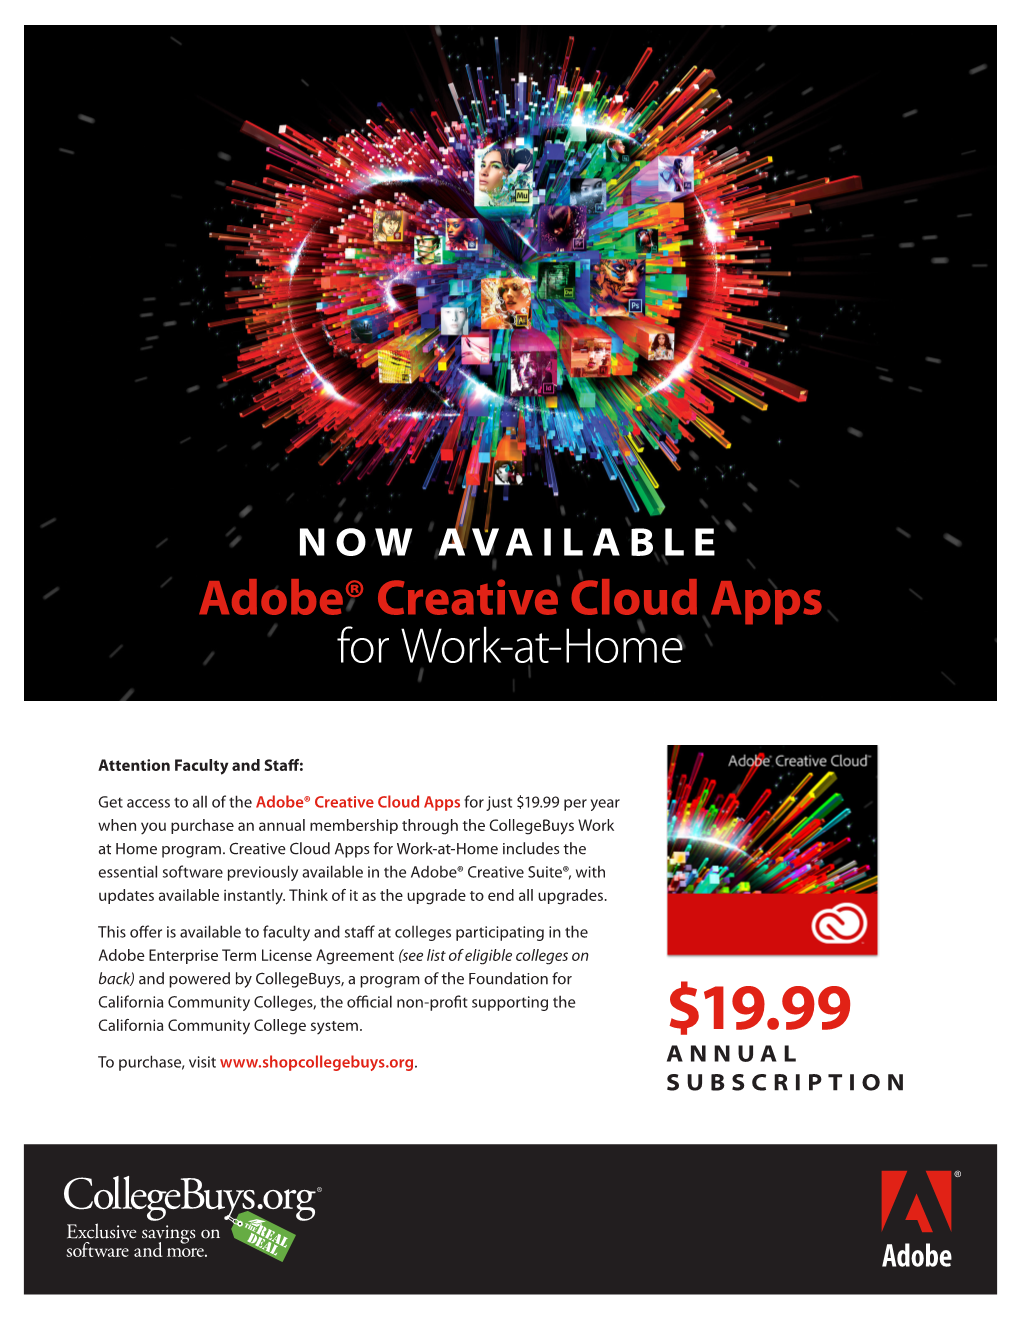 NOW AVAILABLE Adobe® Creative Cloud Apps for Work-At-Home